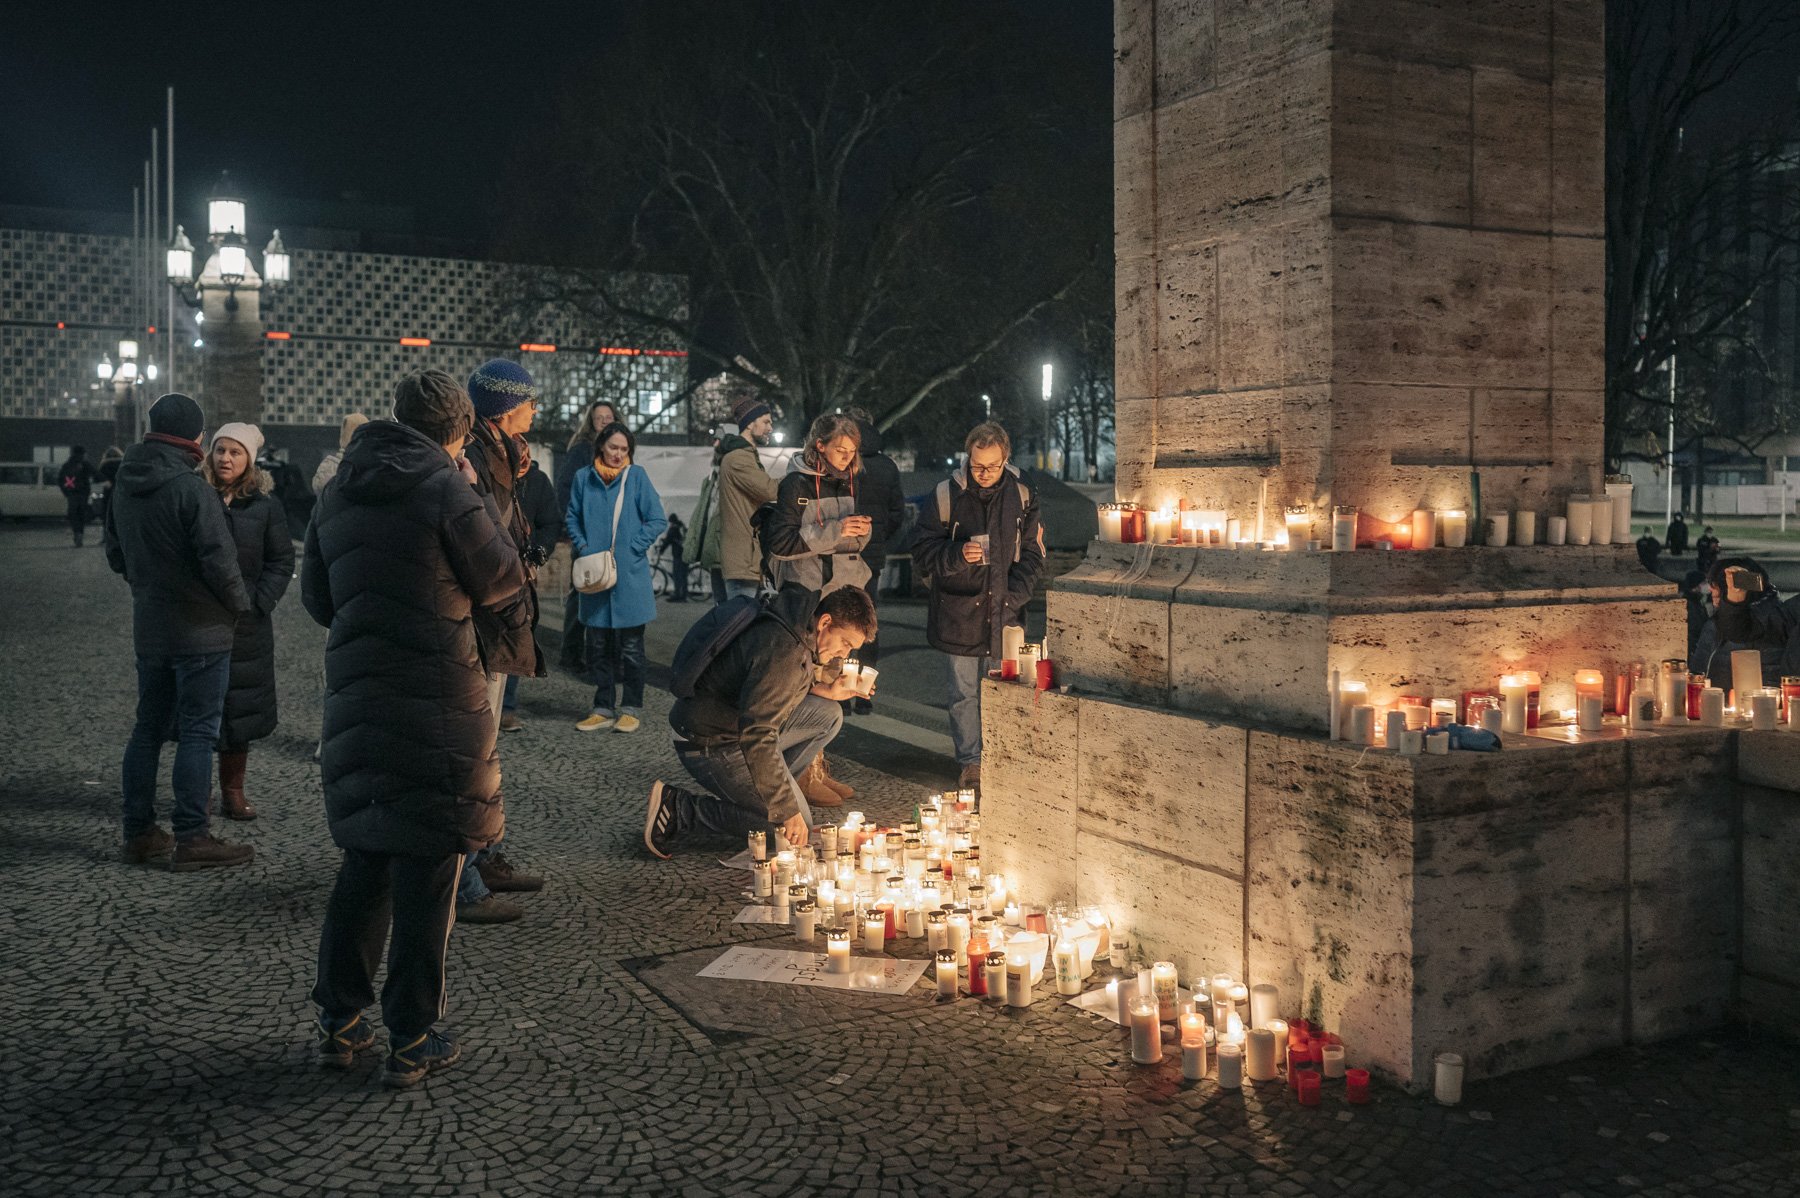  Conspiracy believers and right-wingers light candles in front of the town hall as a sign of protest against the current measures. In the winter of 2021/22, demonstrations against the Corona measures take place every Monday evening in many German cit